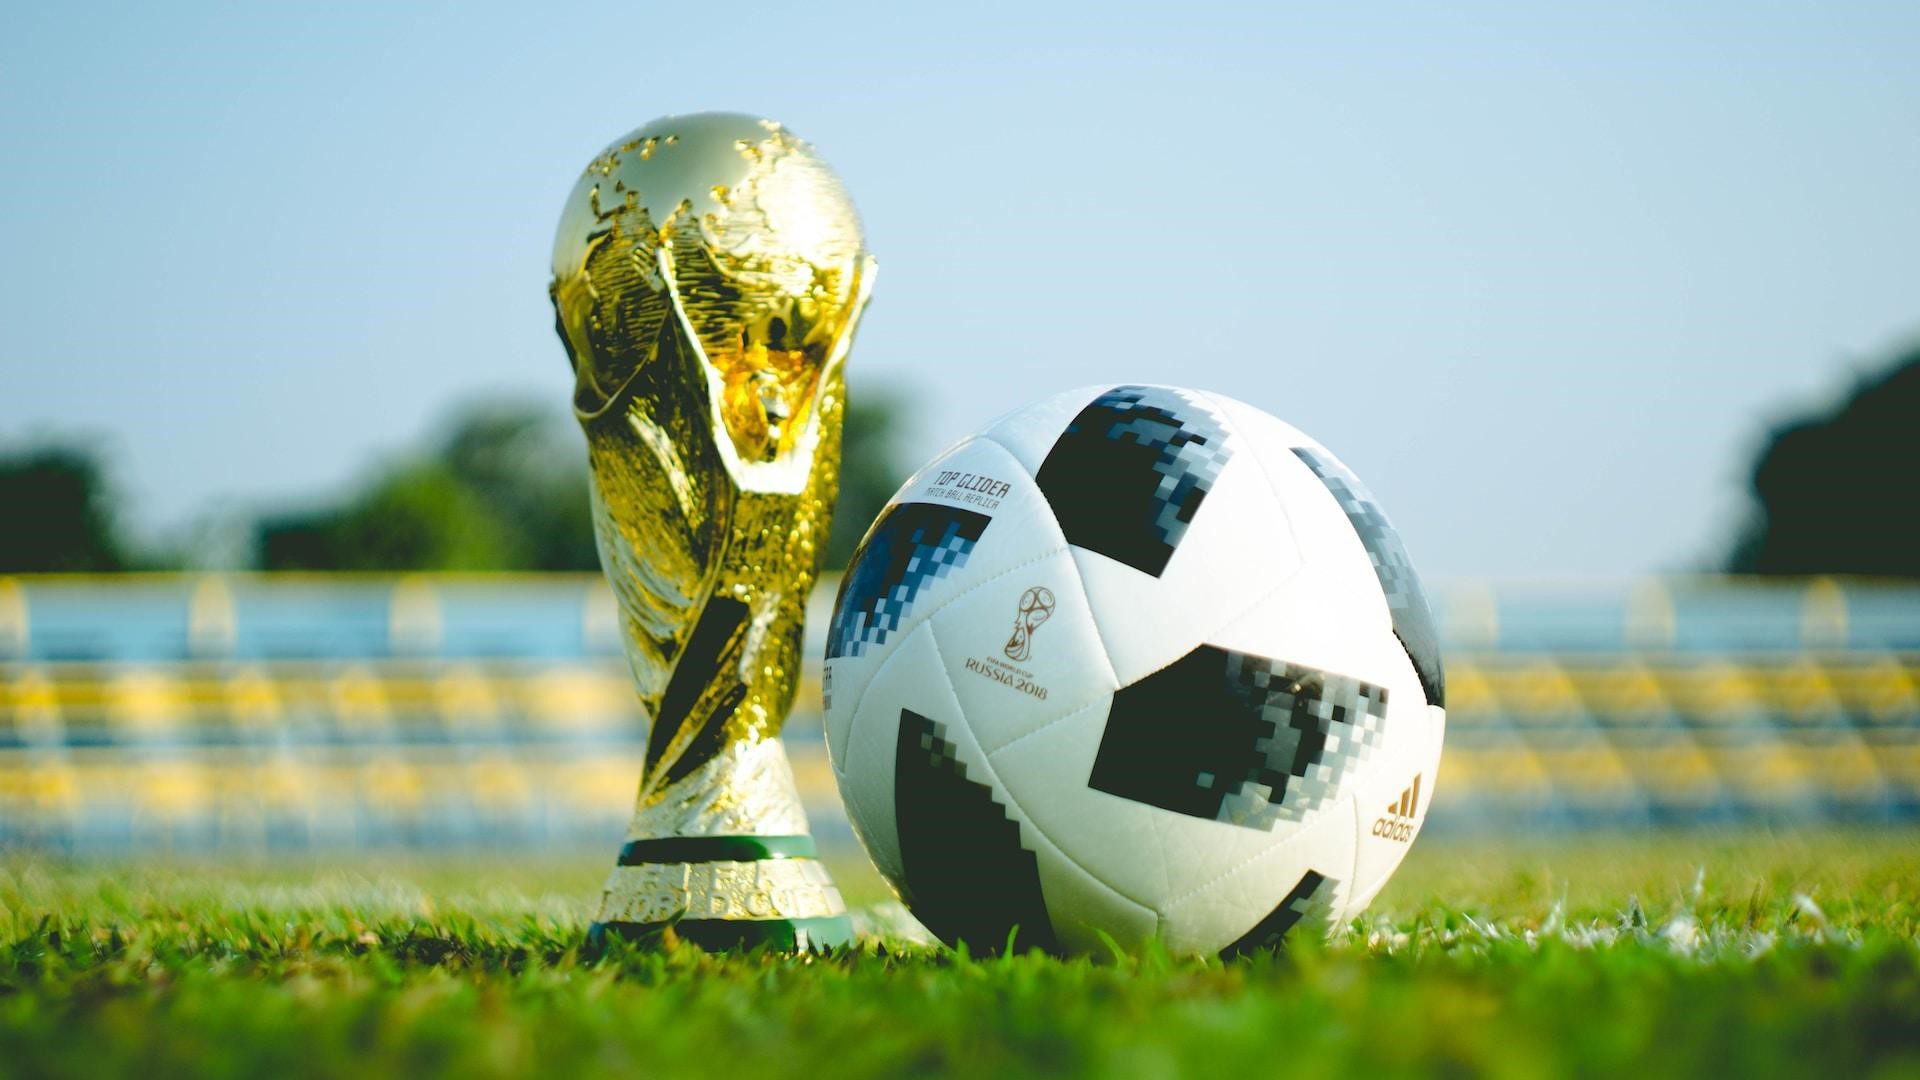 An image of the FIFA trophy and a football